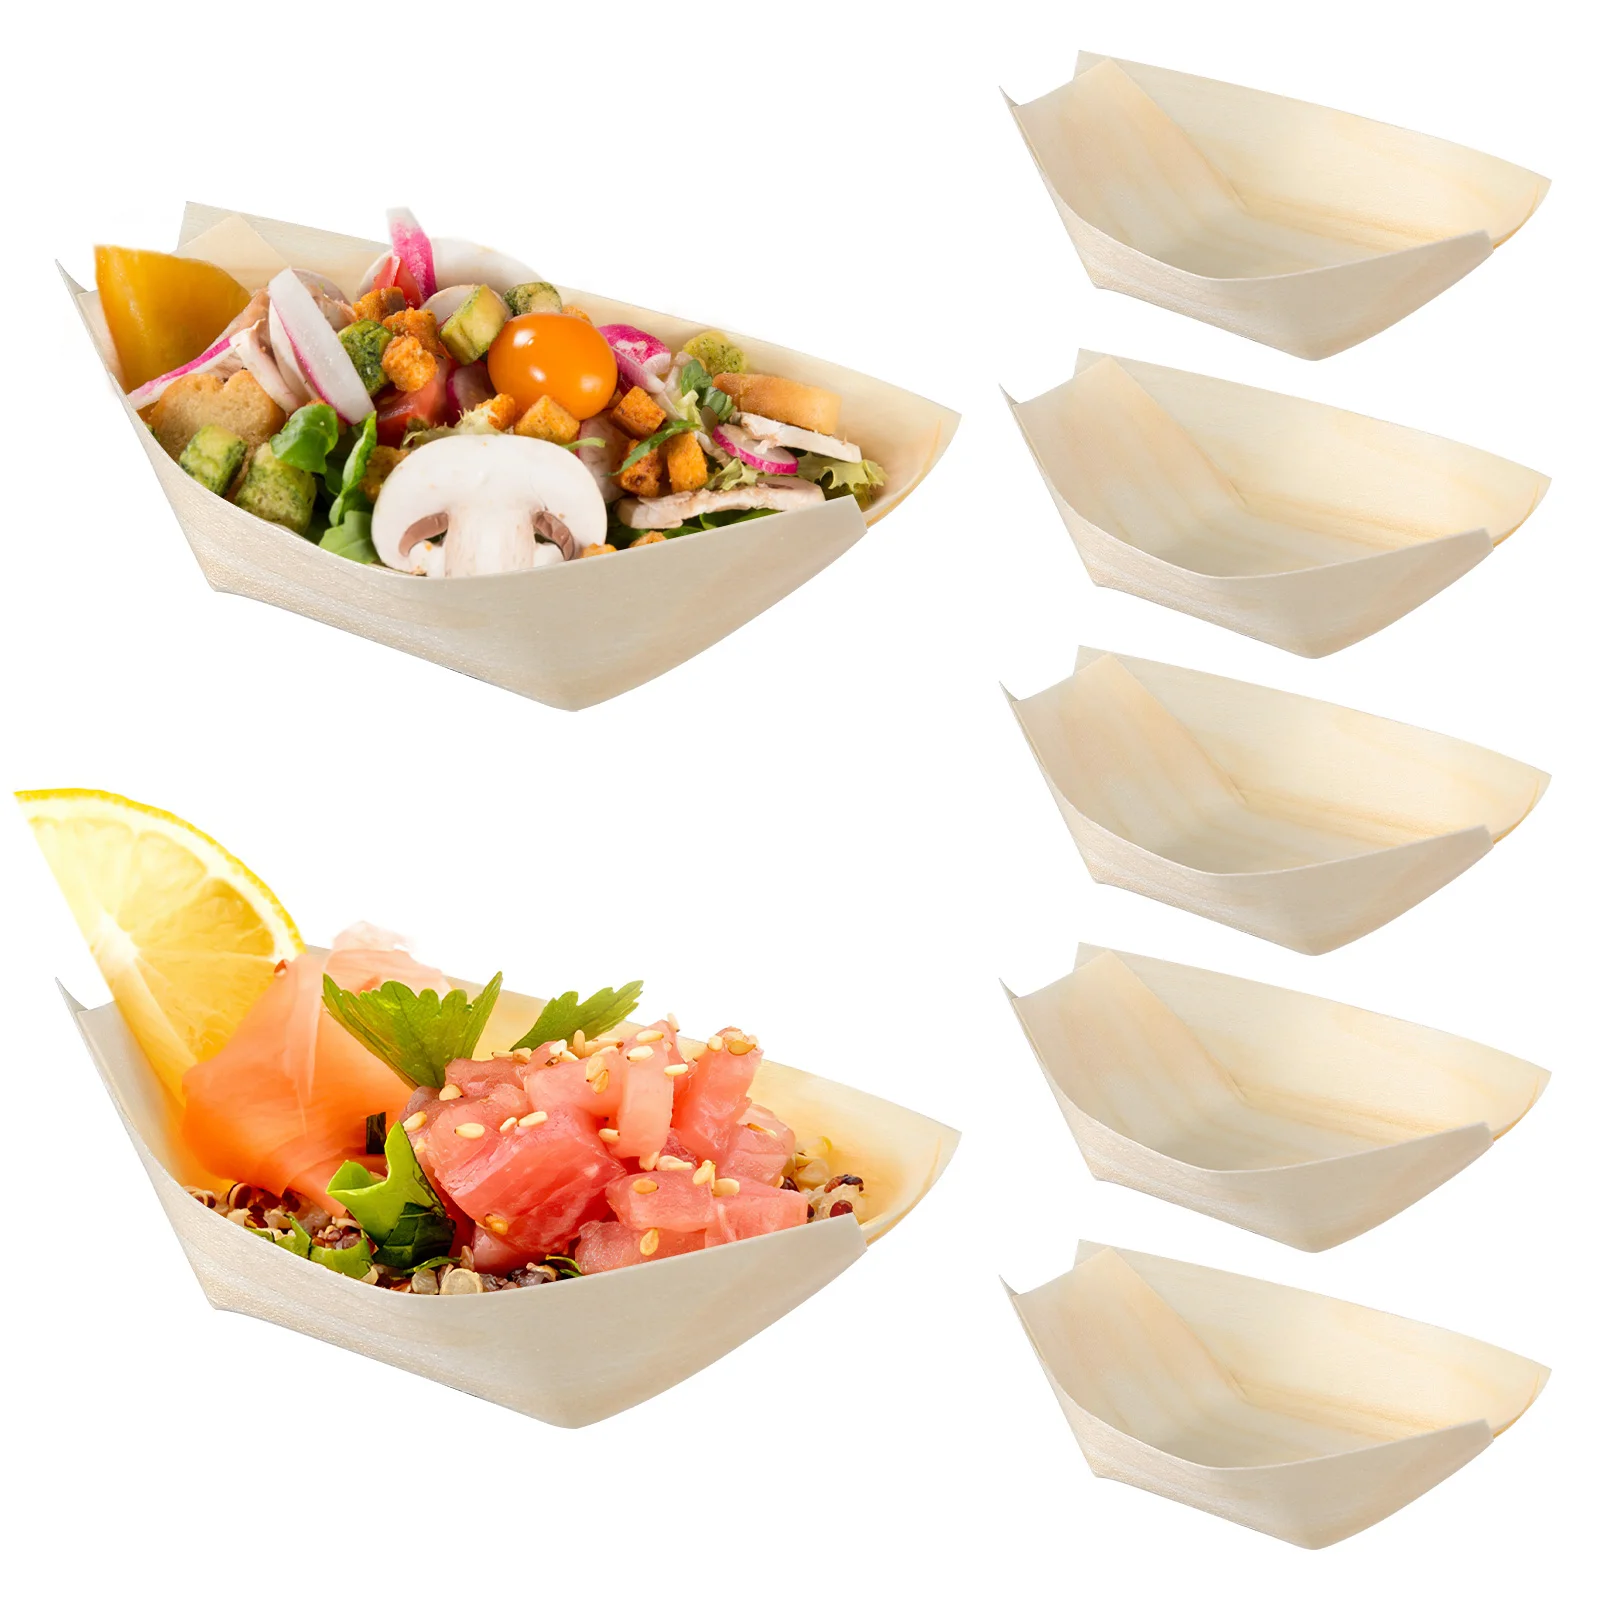 

100 Pcs Food Trays Disposable Charcuterie Cups Desert Plates Wooden Utensil Set Taco Bar Serving Party Paper Boats Mini Boards